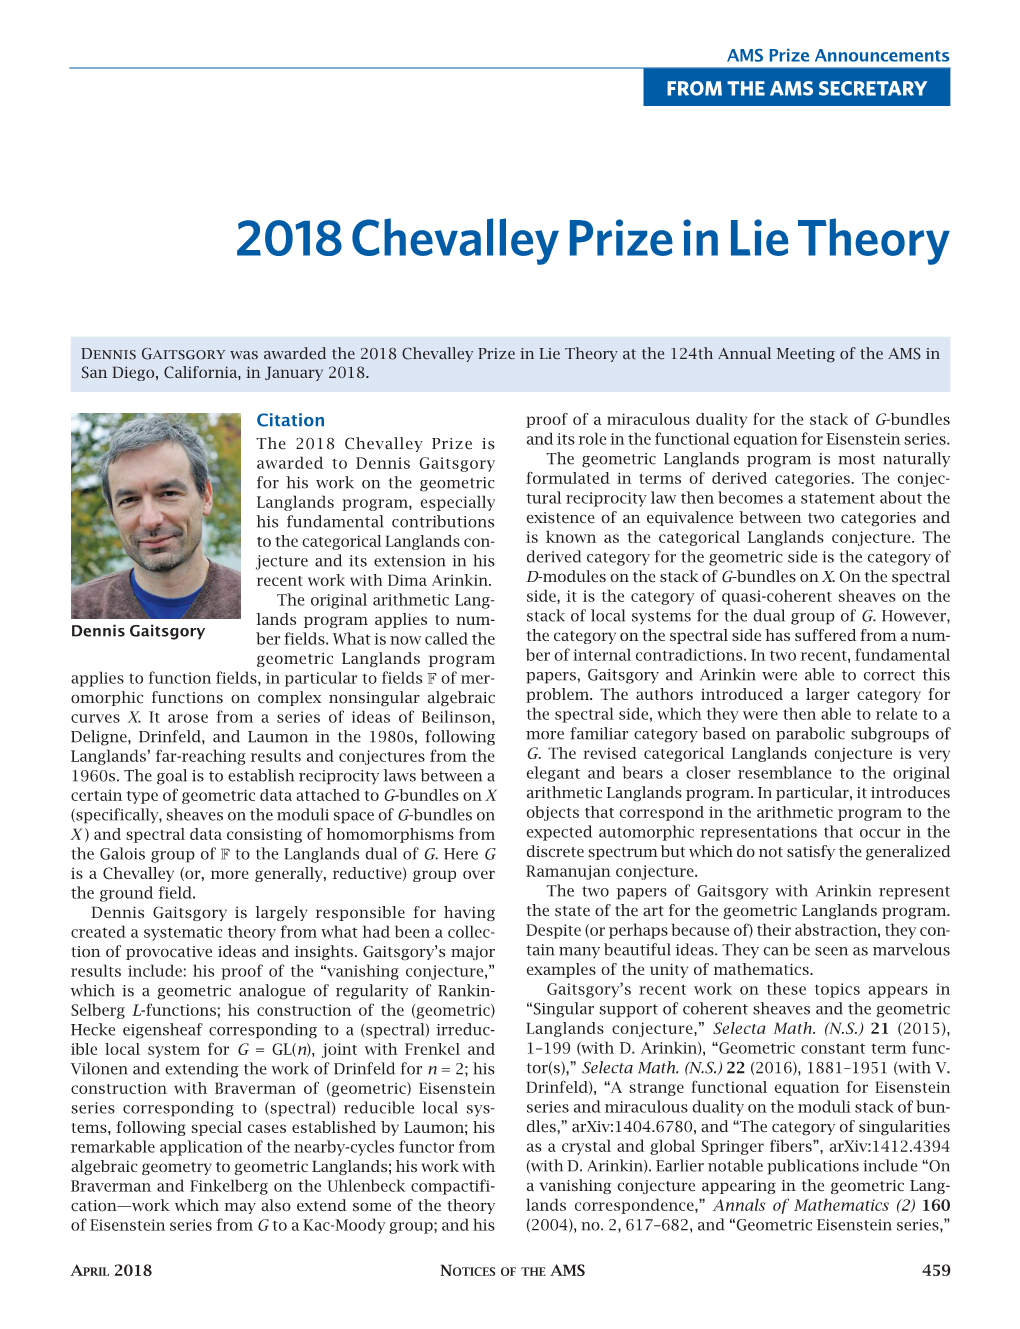 2018 Chevalley Prize in Lie Theory